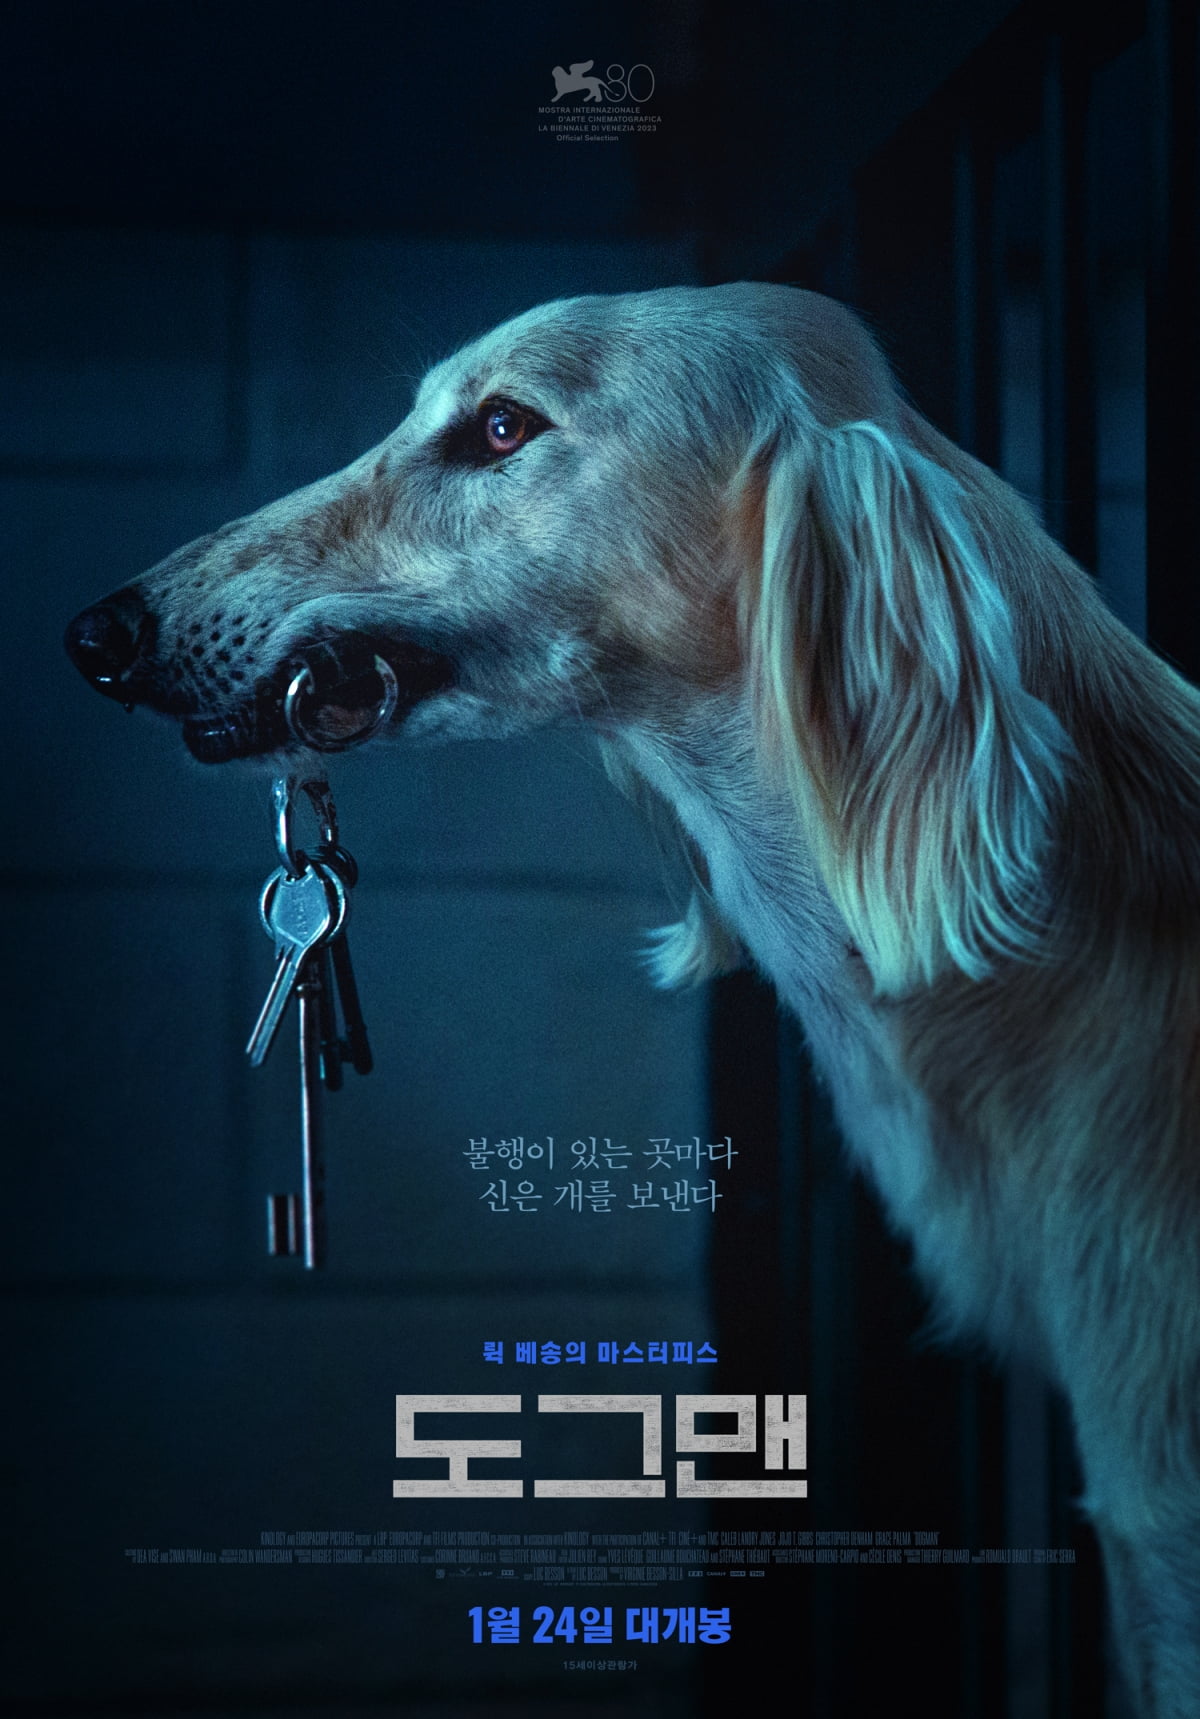 Director Luc Besson's new film 'Dogman' will be released in Korea on January 24, 2024.